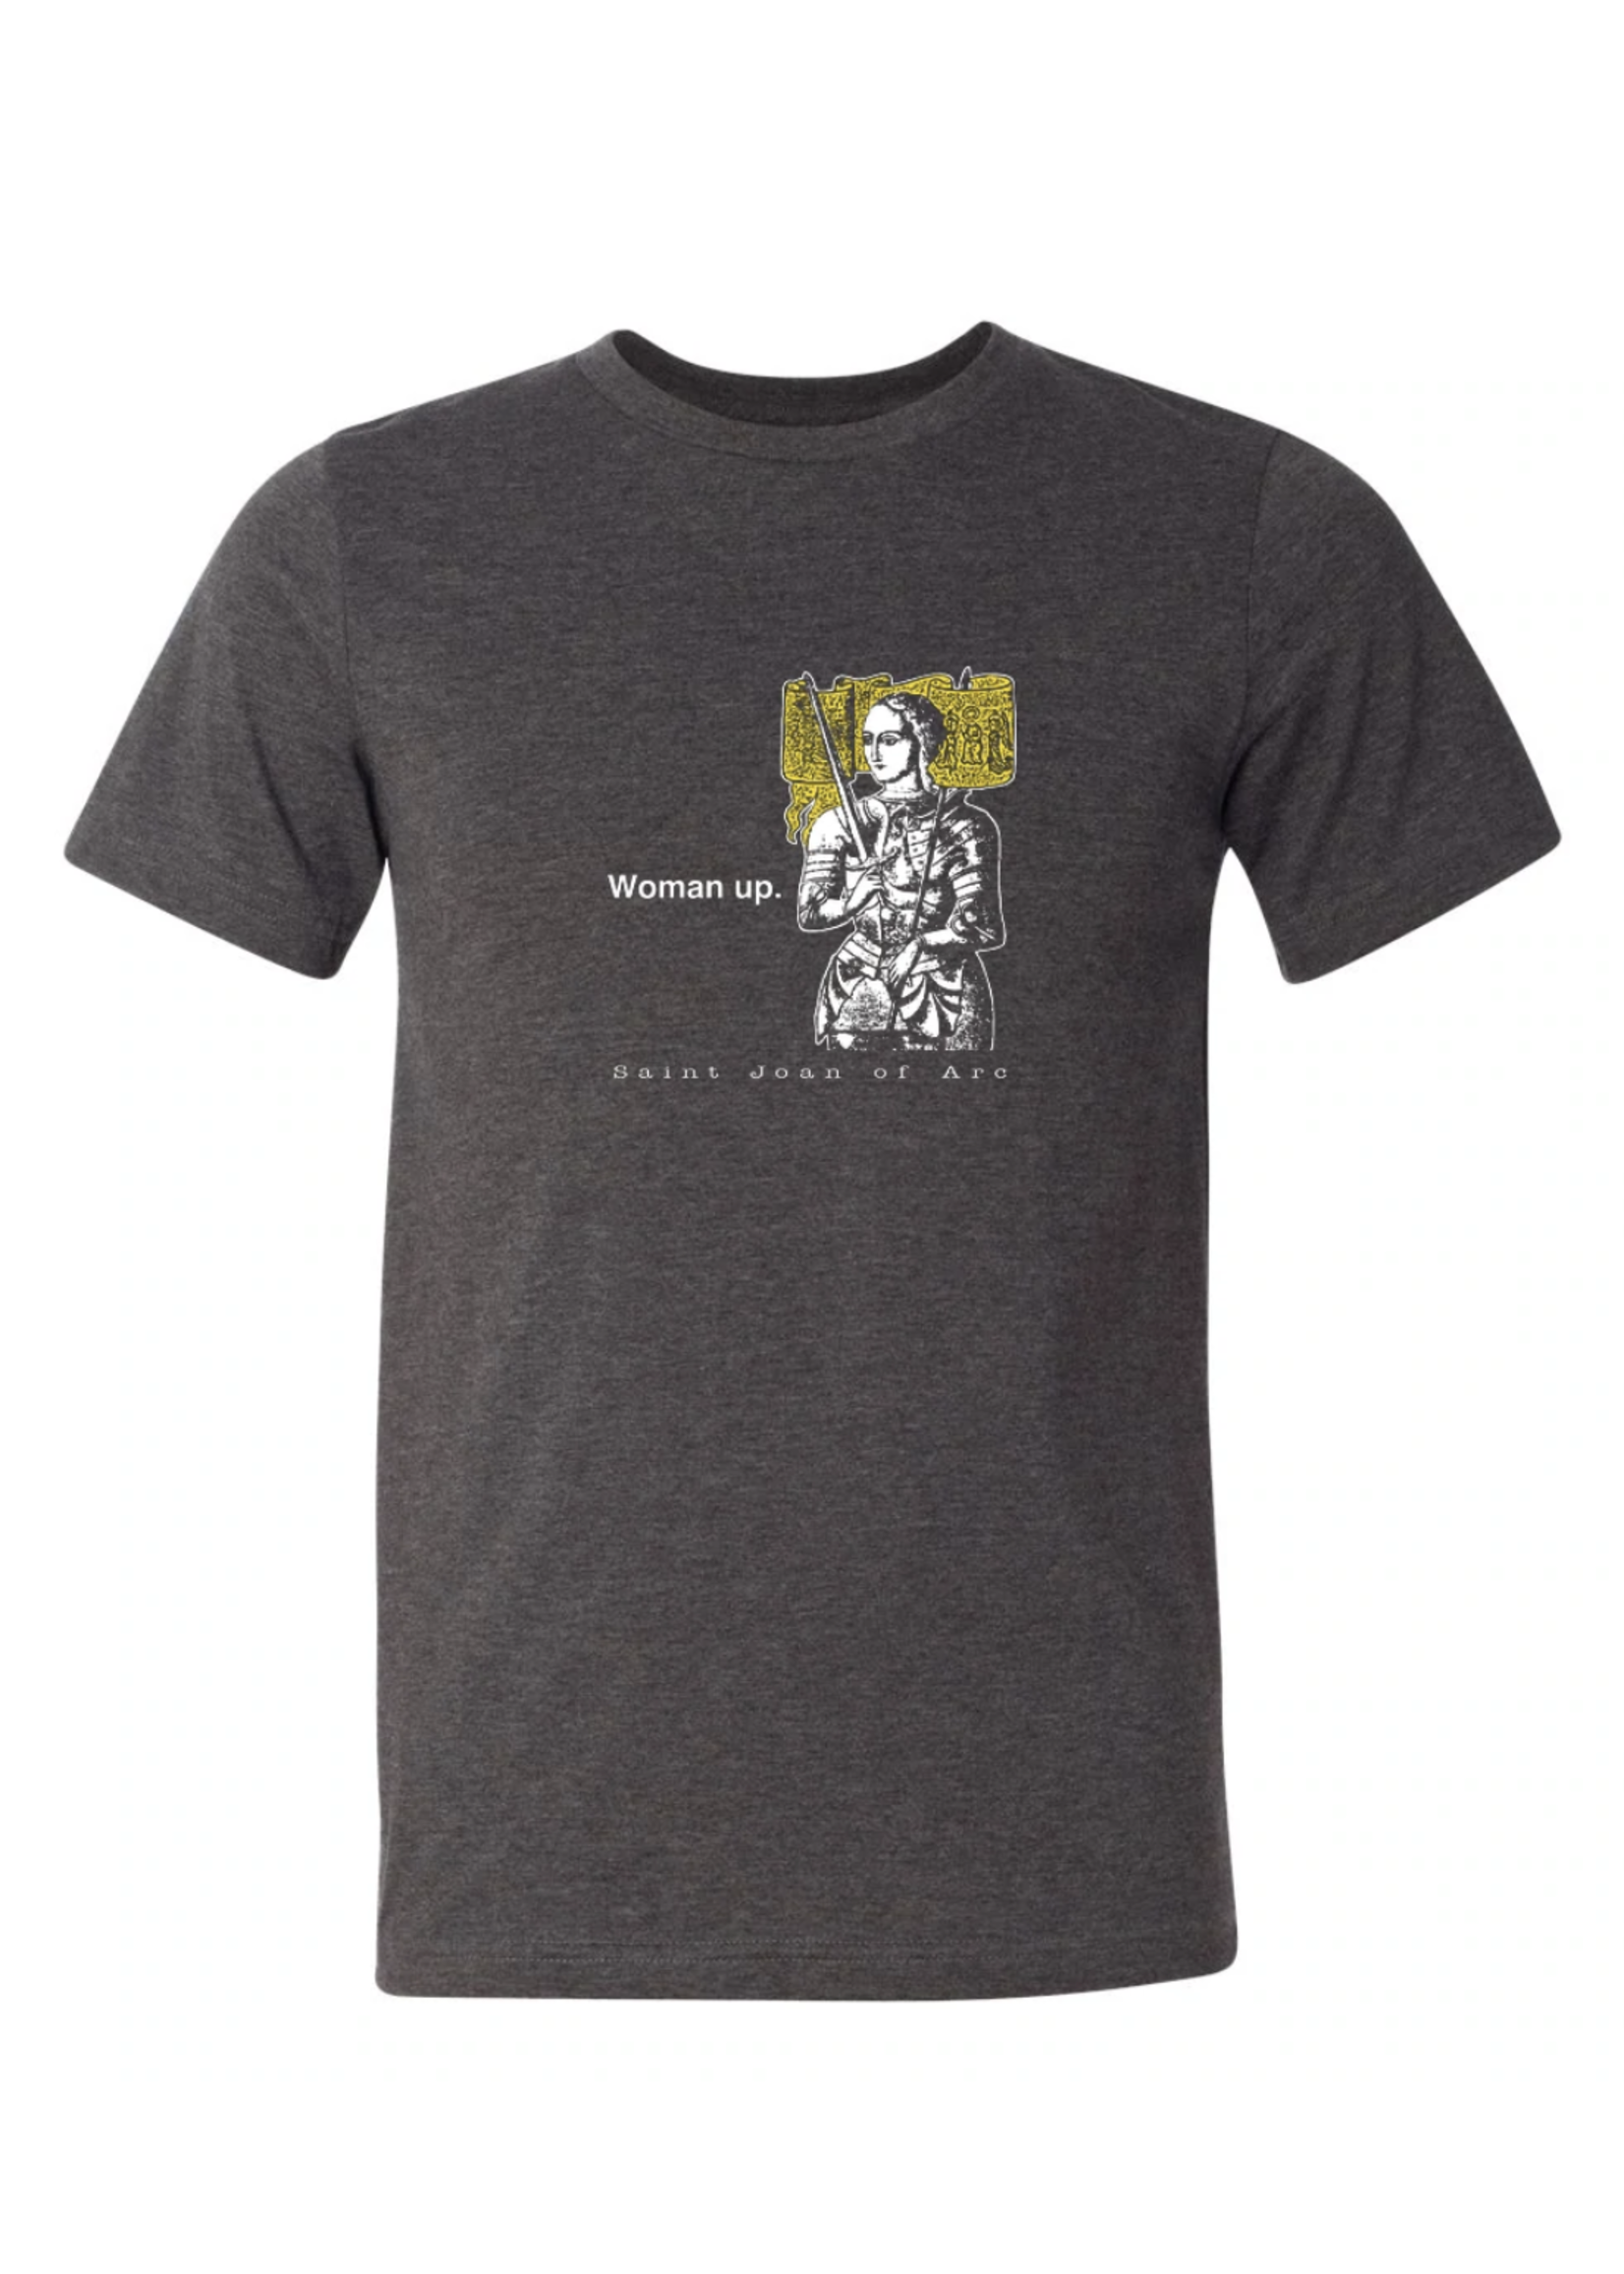 That One Sheep Woman Up - St Joan of Arc T-shirt